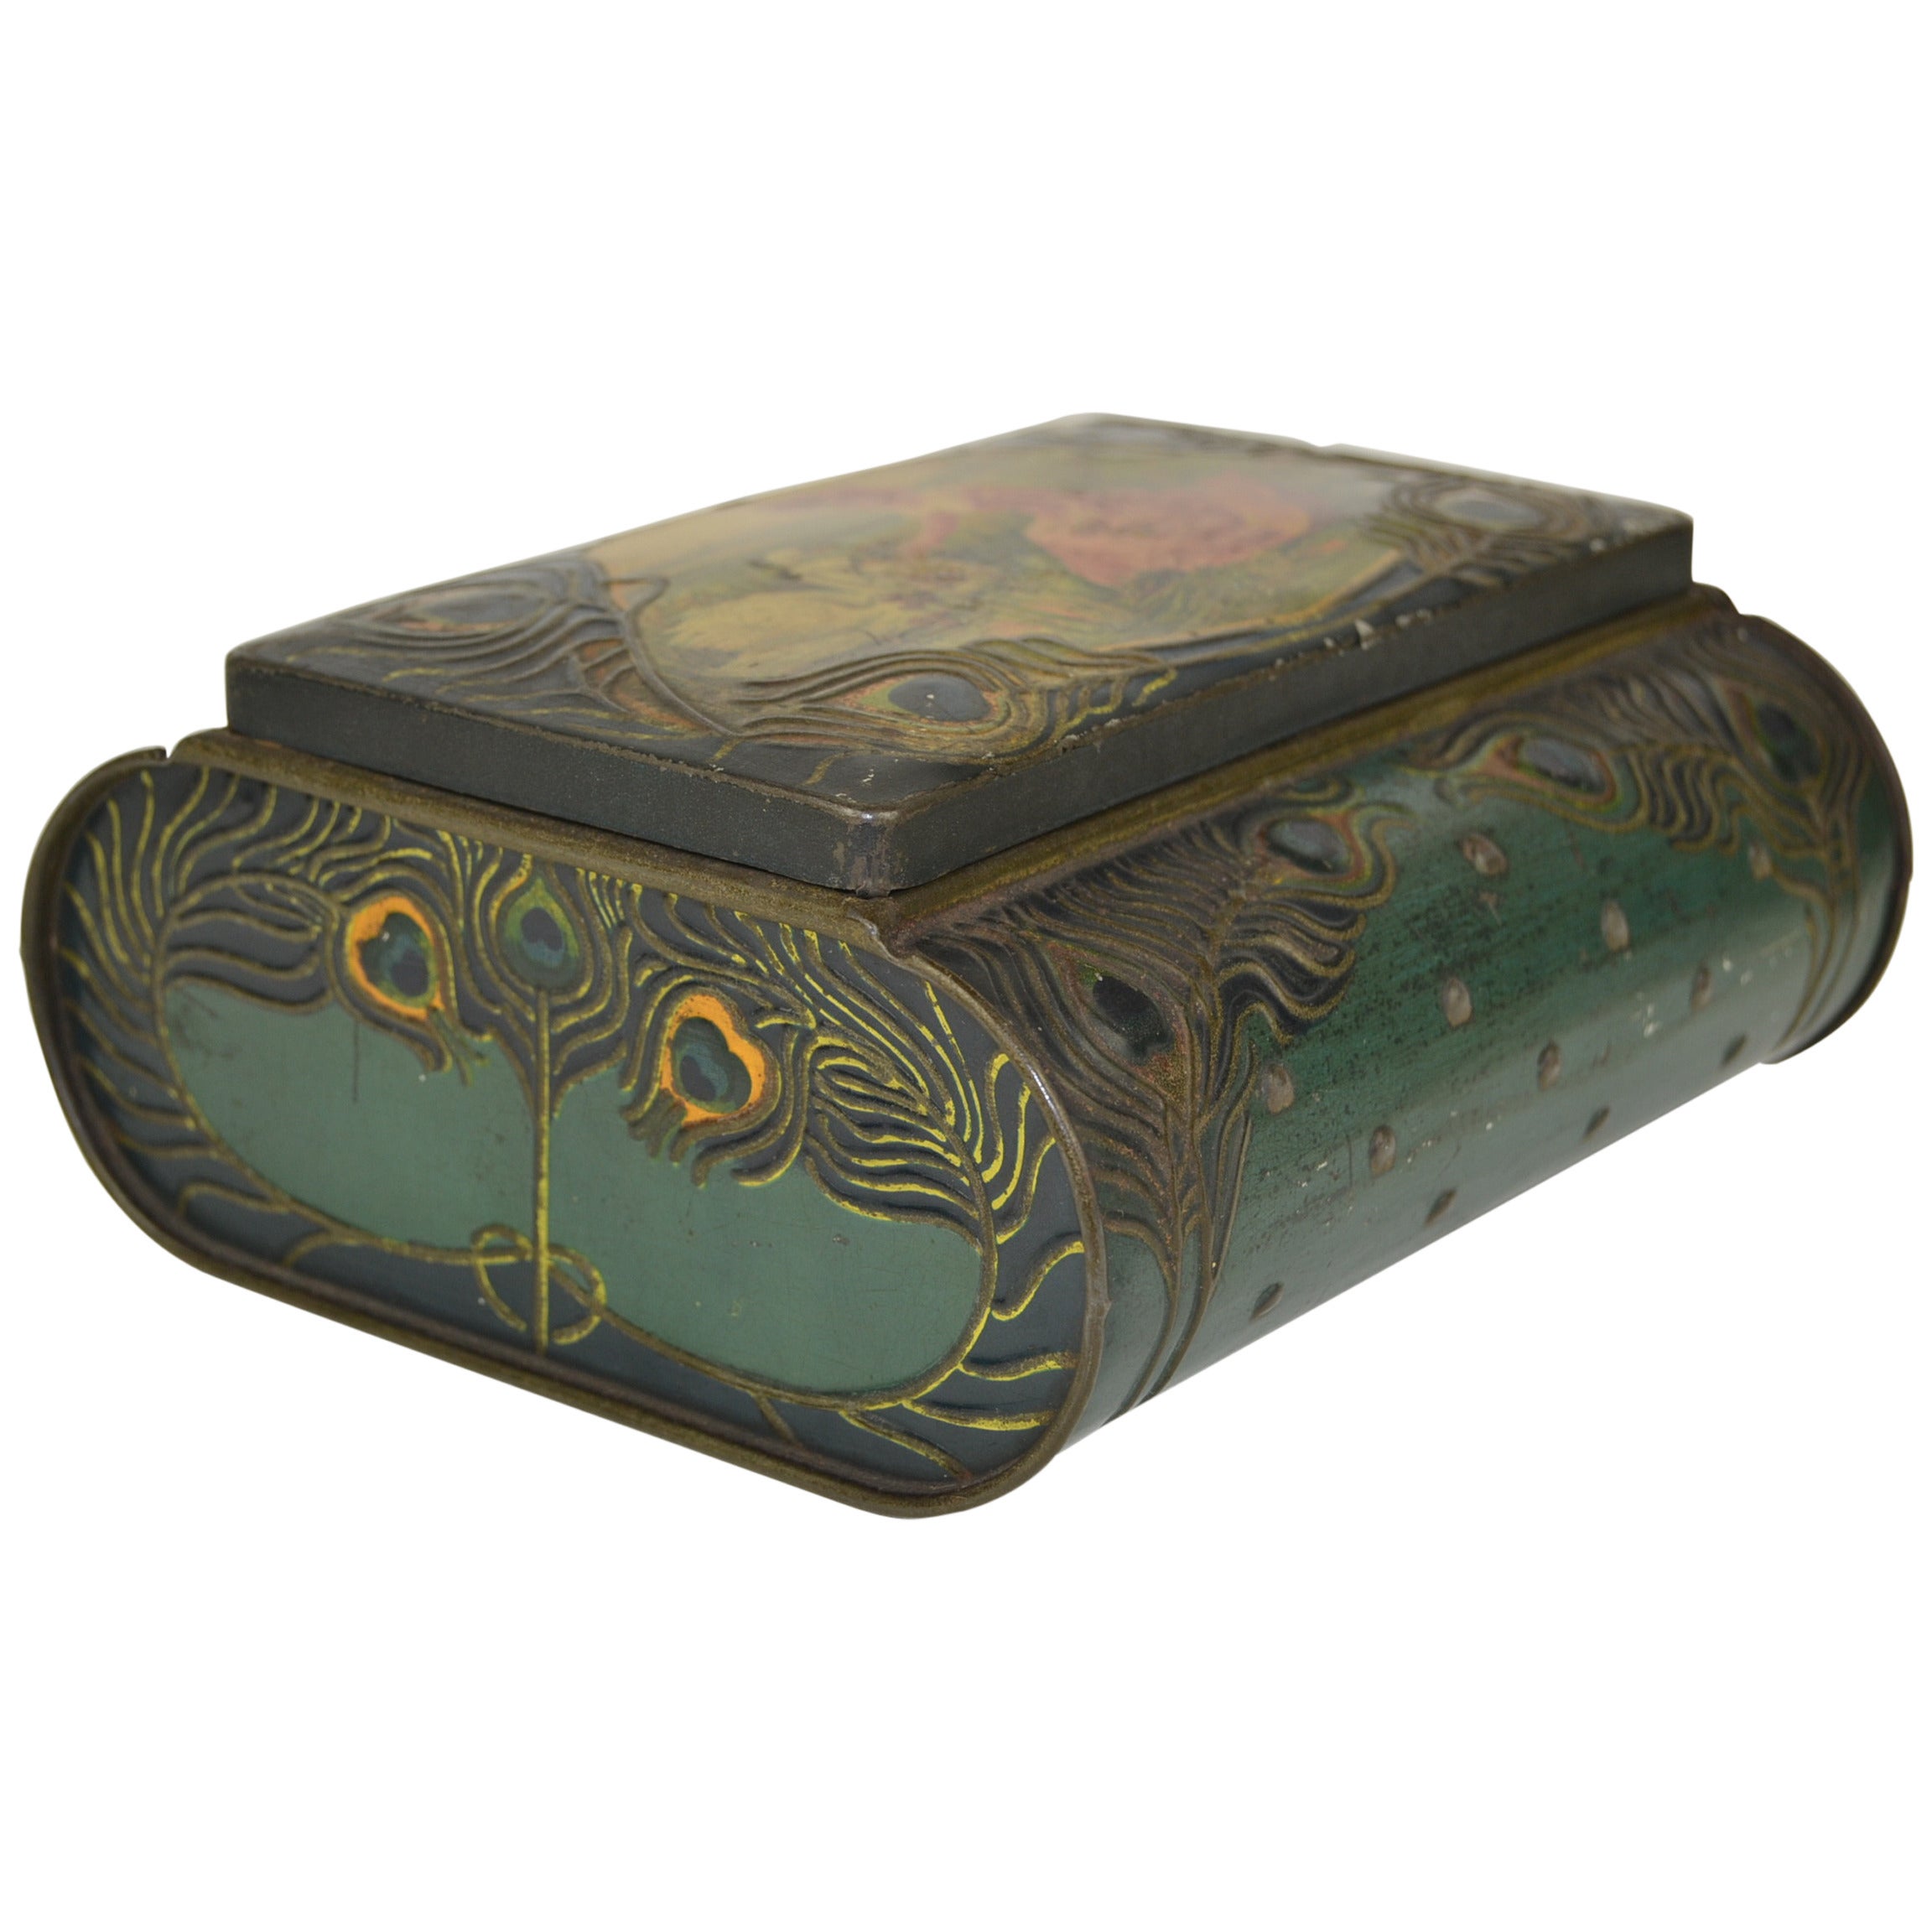 Charming and stylish rare Biscuit Tin  - Biscuit Tin Box - Biscuit Storage Box. 
This Antique Tin dates Early 20th century , circa 1900. 
It is a Lithographic Tin with an embossed design. 
The box was made for the Belgian Biscuit Factory De